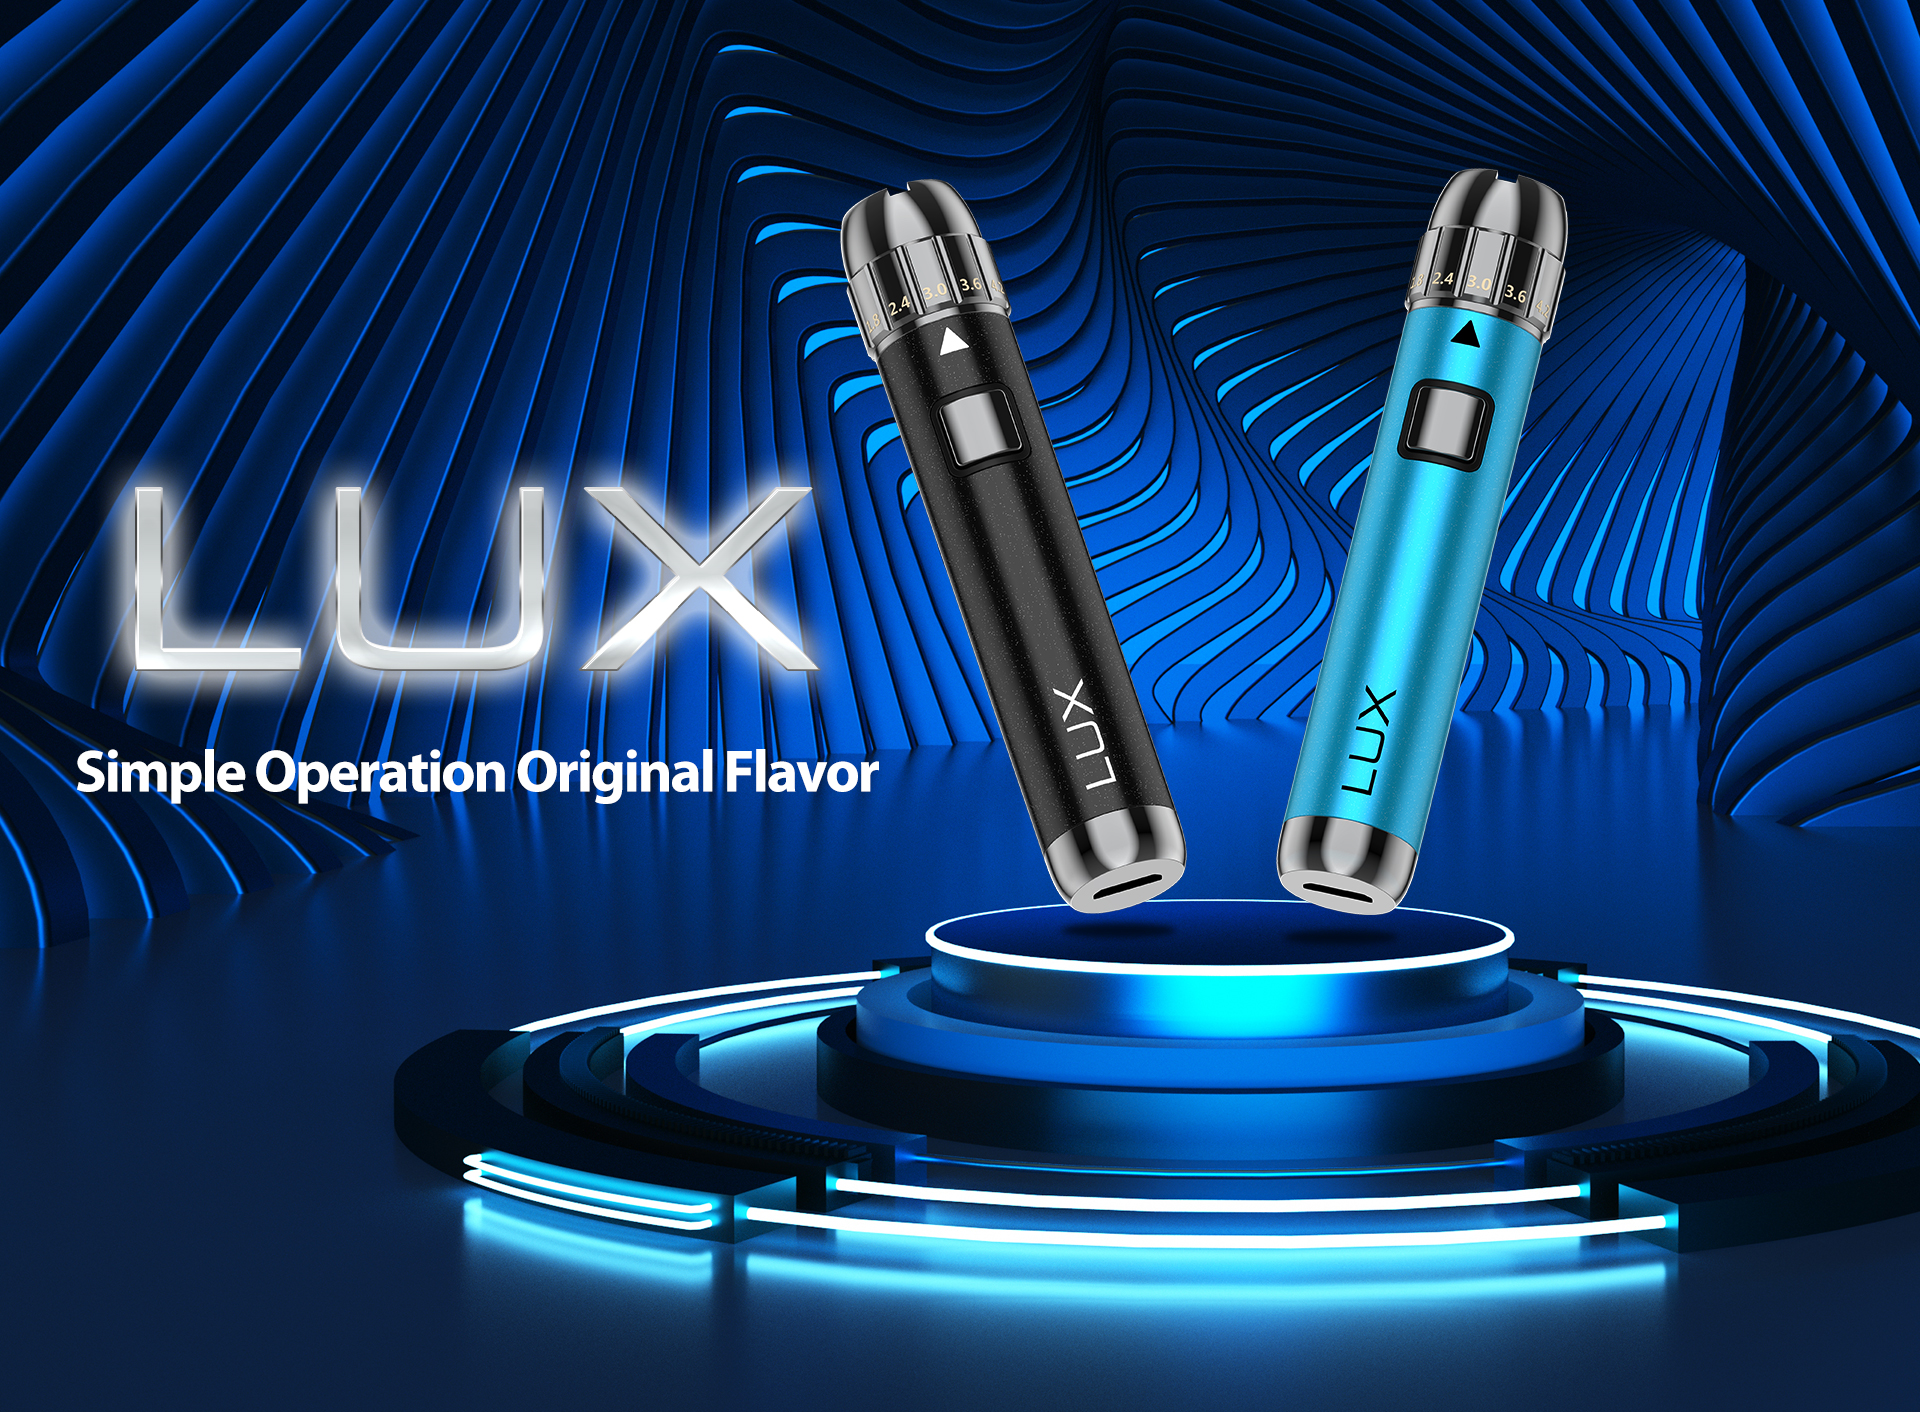 Yocan LUX provides Simple Operation Original Flavor